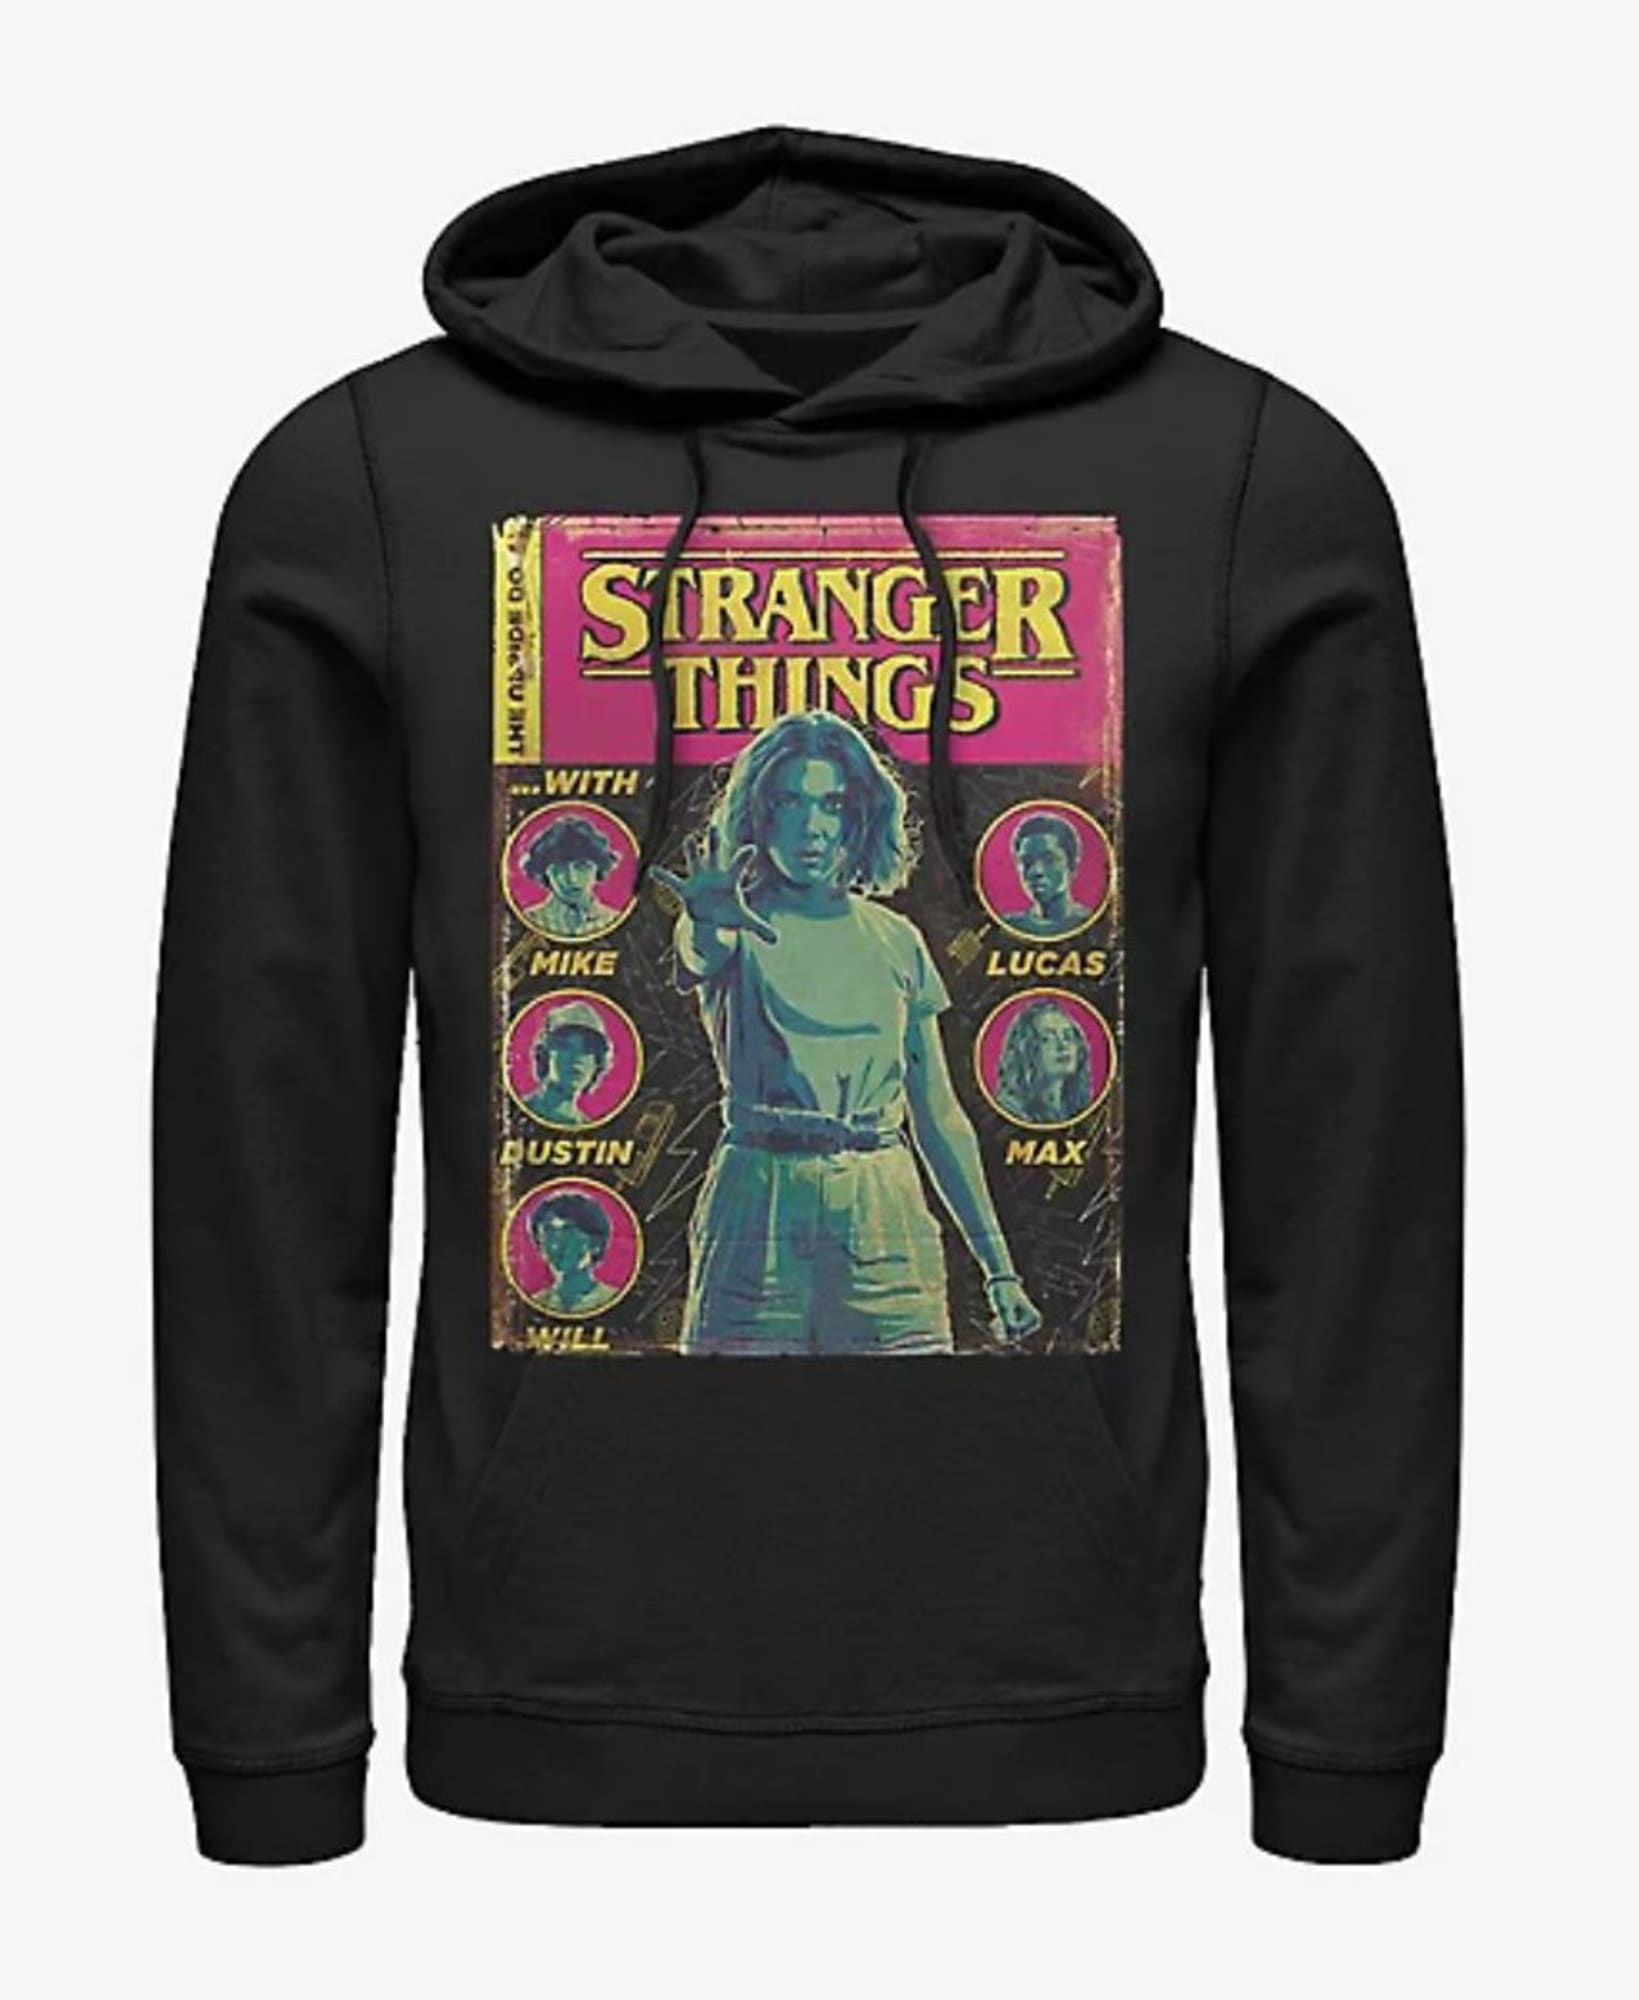 Stranger Things Graphic Hoodie | vlr.eng.br